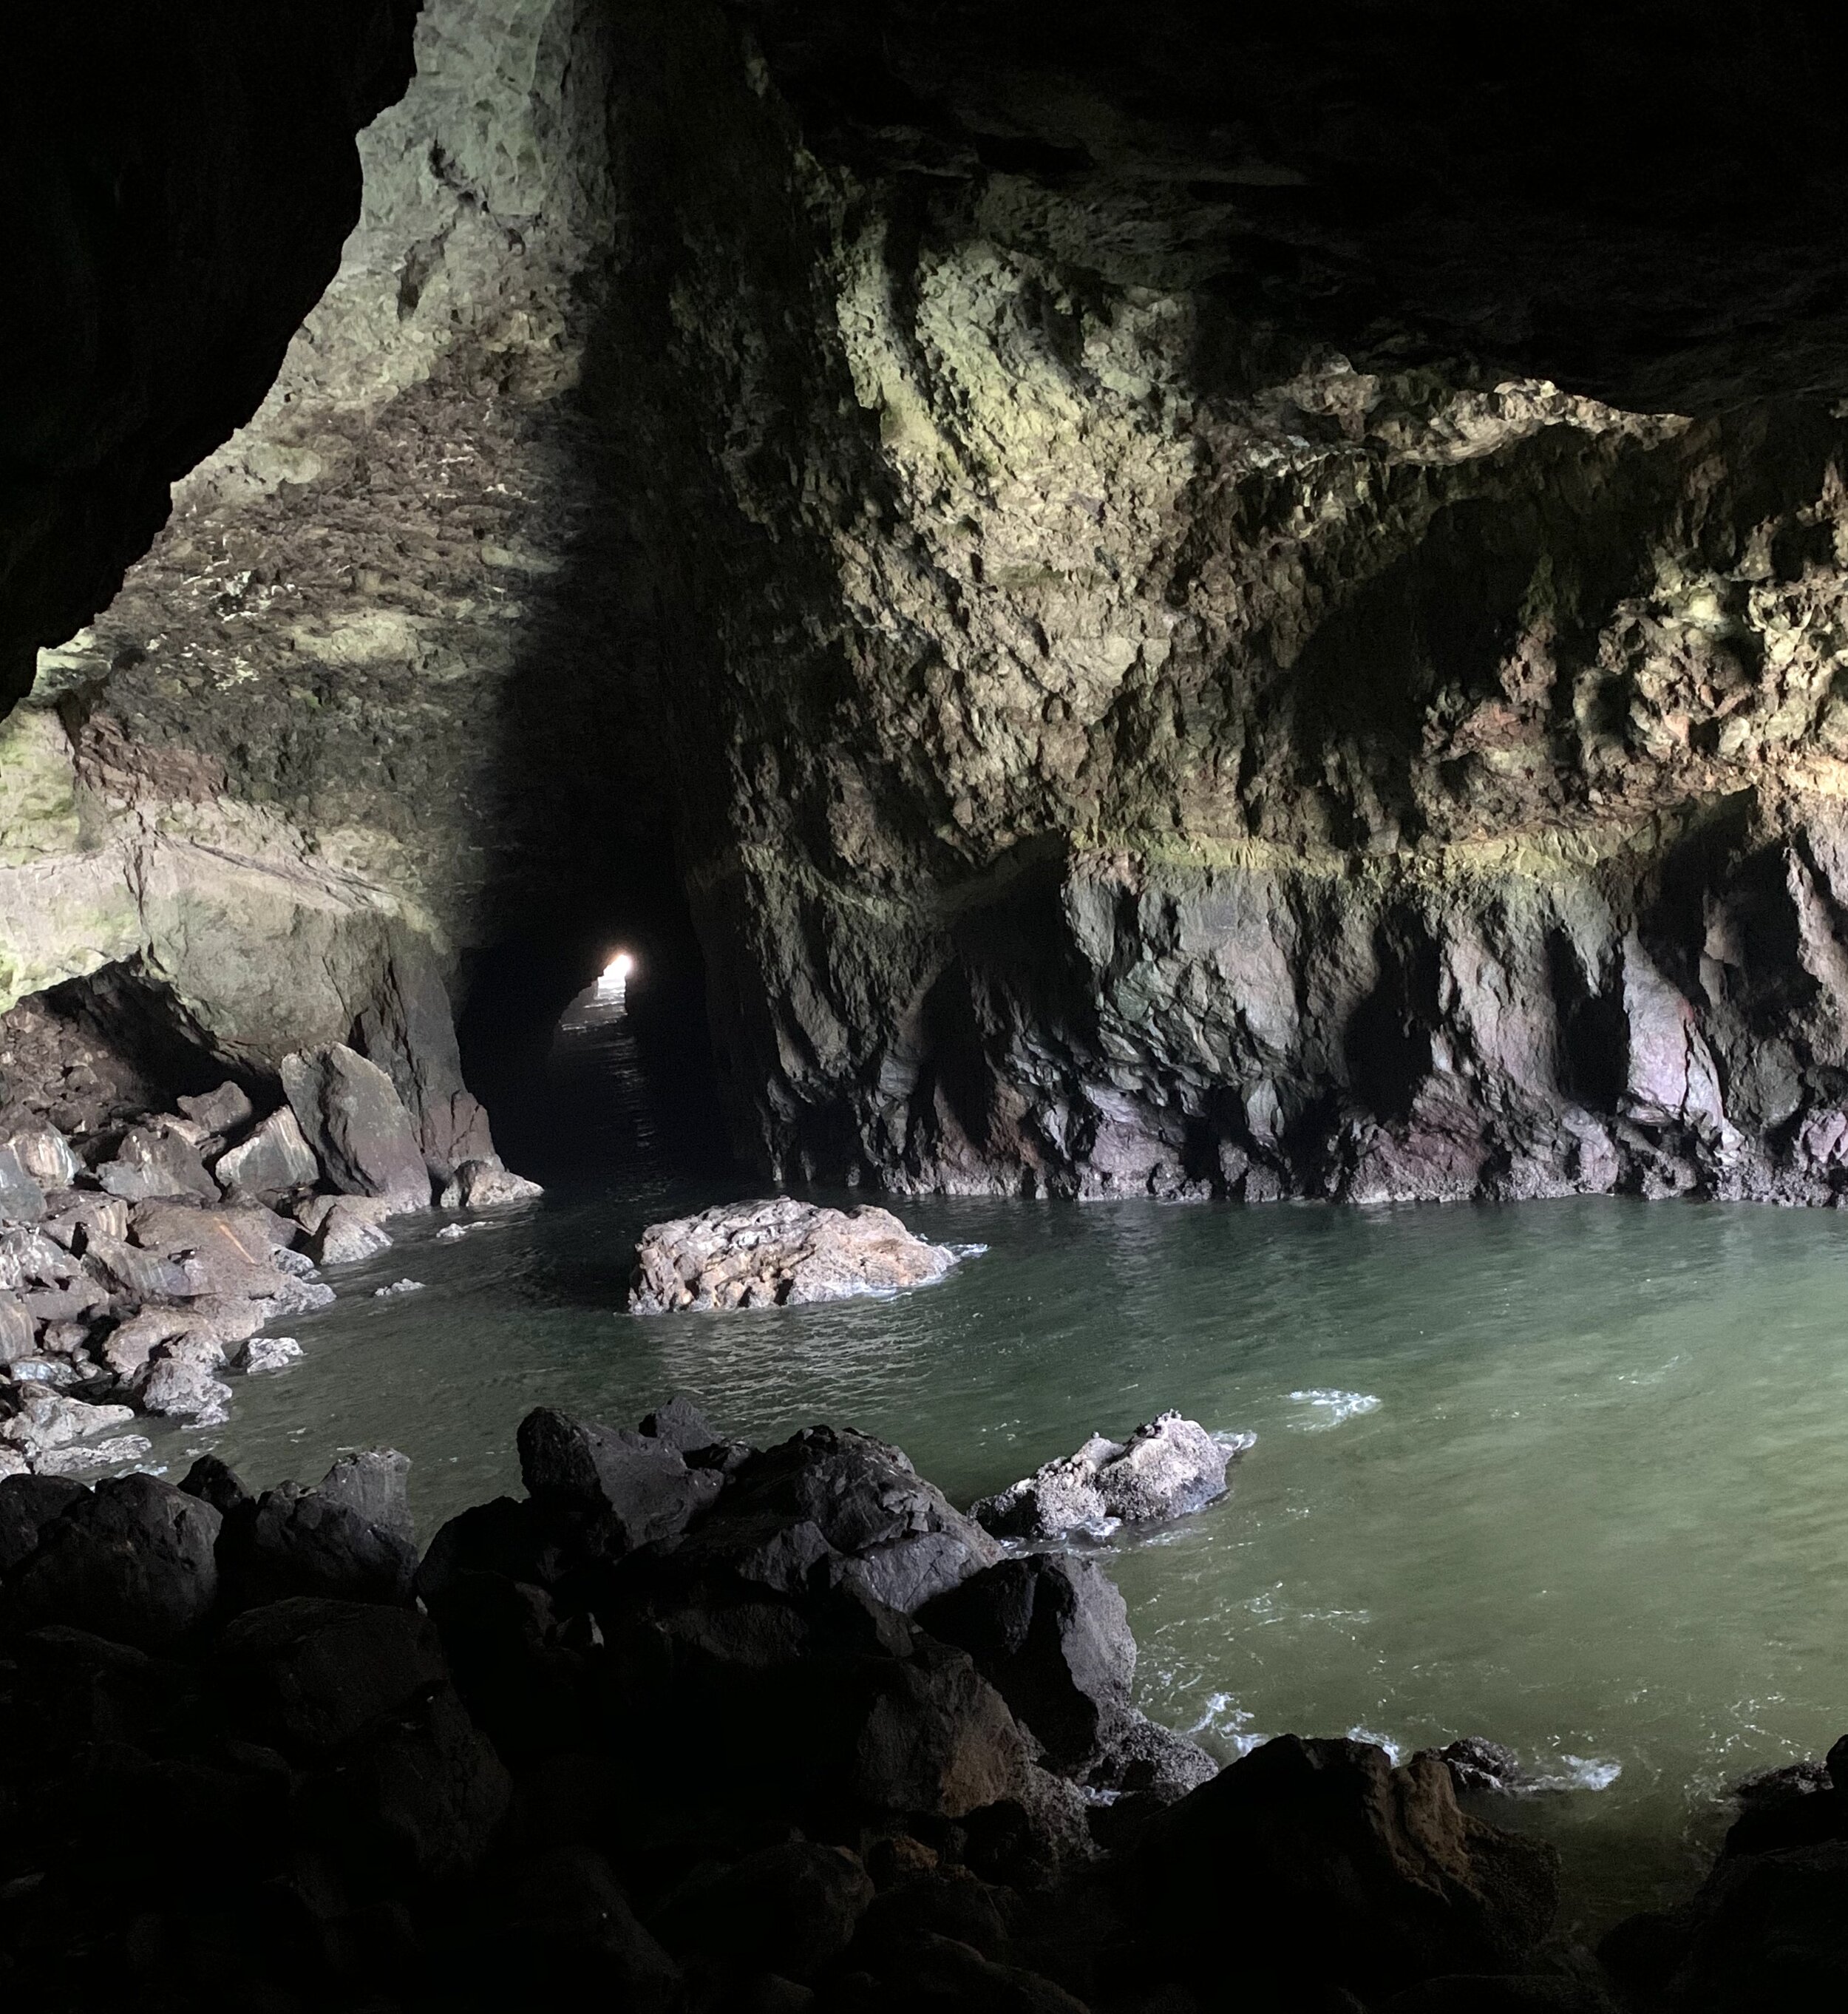  We drove over an hour to visit  Sea Lion Caves , “ America's largest sea cave and the year-round home of the Steller sea lion .” Discovered in 1880, the land was later sold to R.E. Clanton in 1927, who recognized a good tourist trap when he saw one.